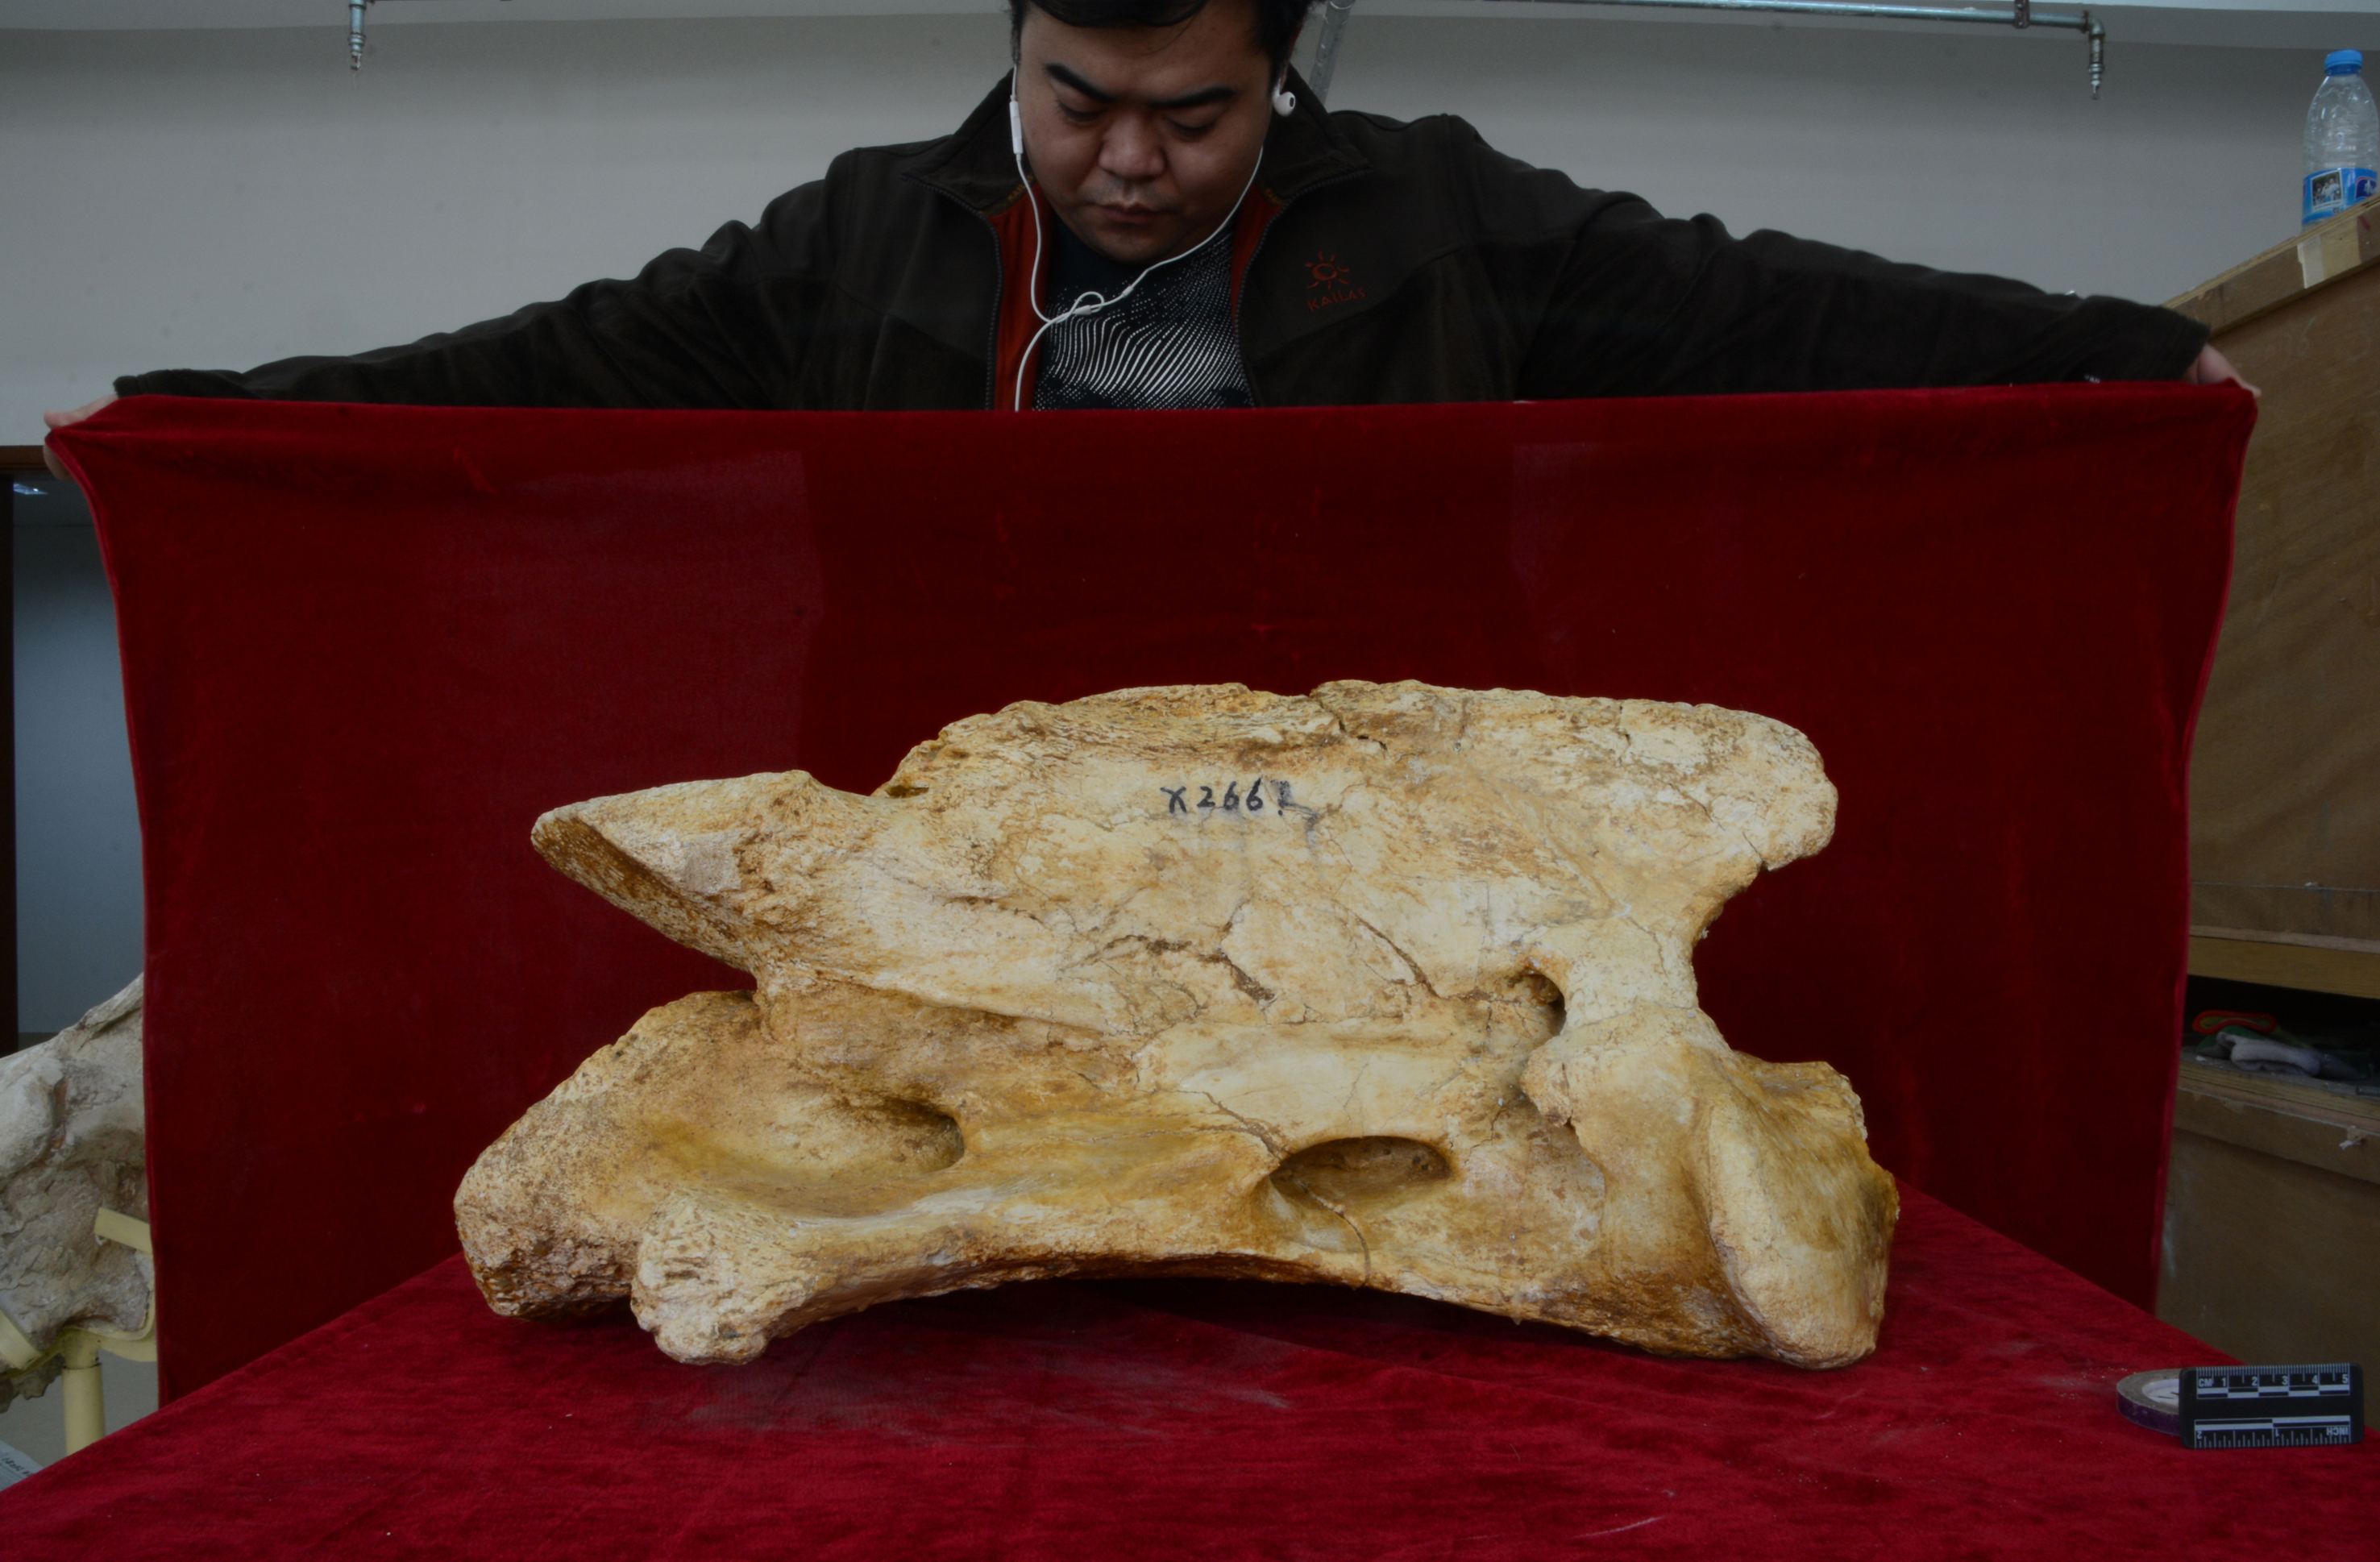 New Fossil Reveals One of The Largest Land Mammals Ever Found, And It's a Rhino